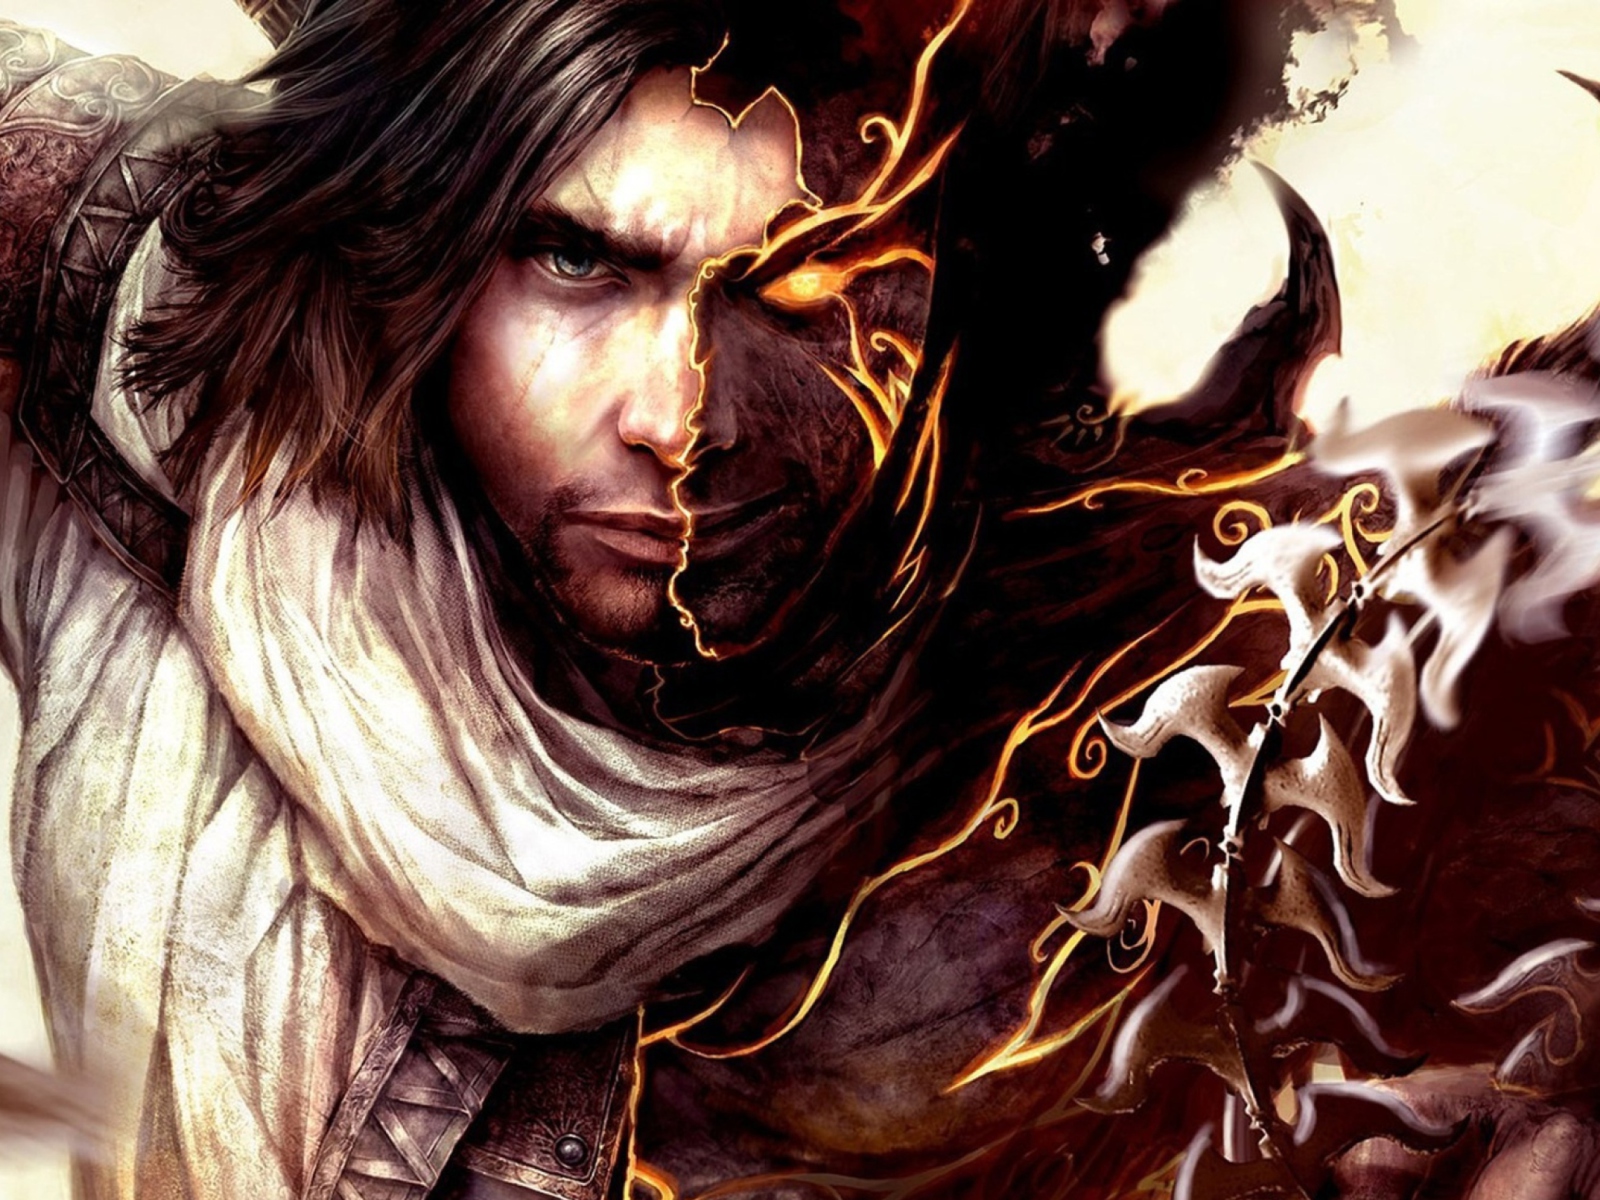 Prince Of Persia - The Two Thrones screenshot #1 1600x1200